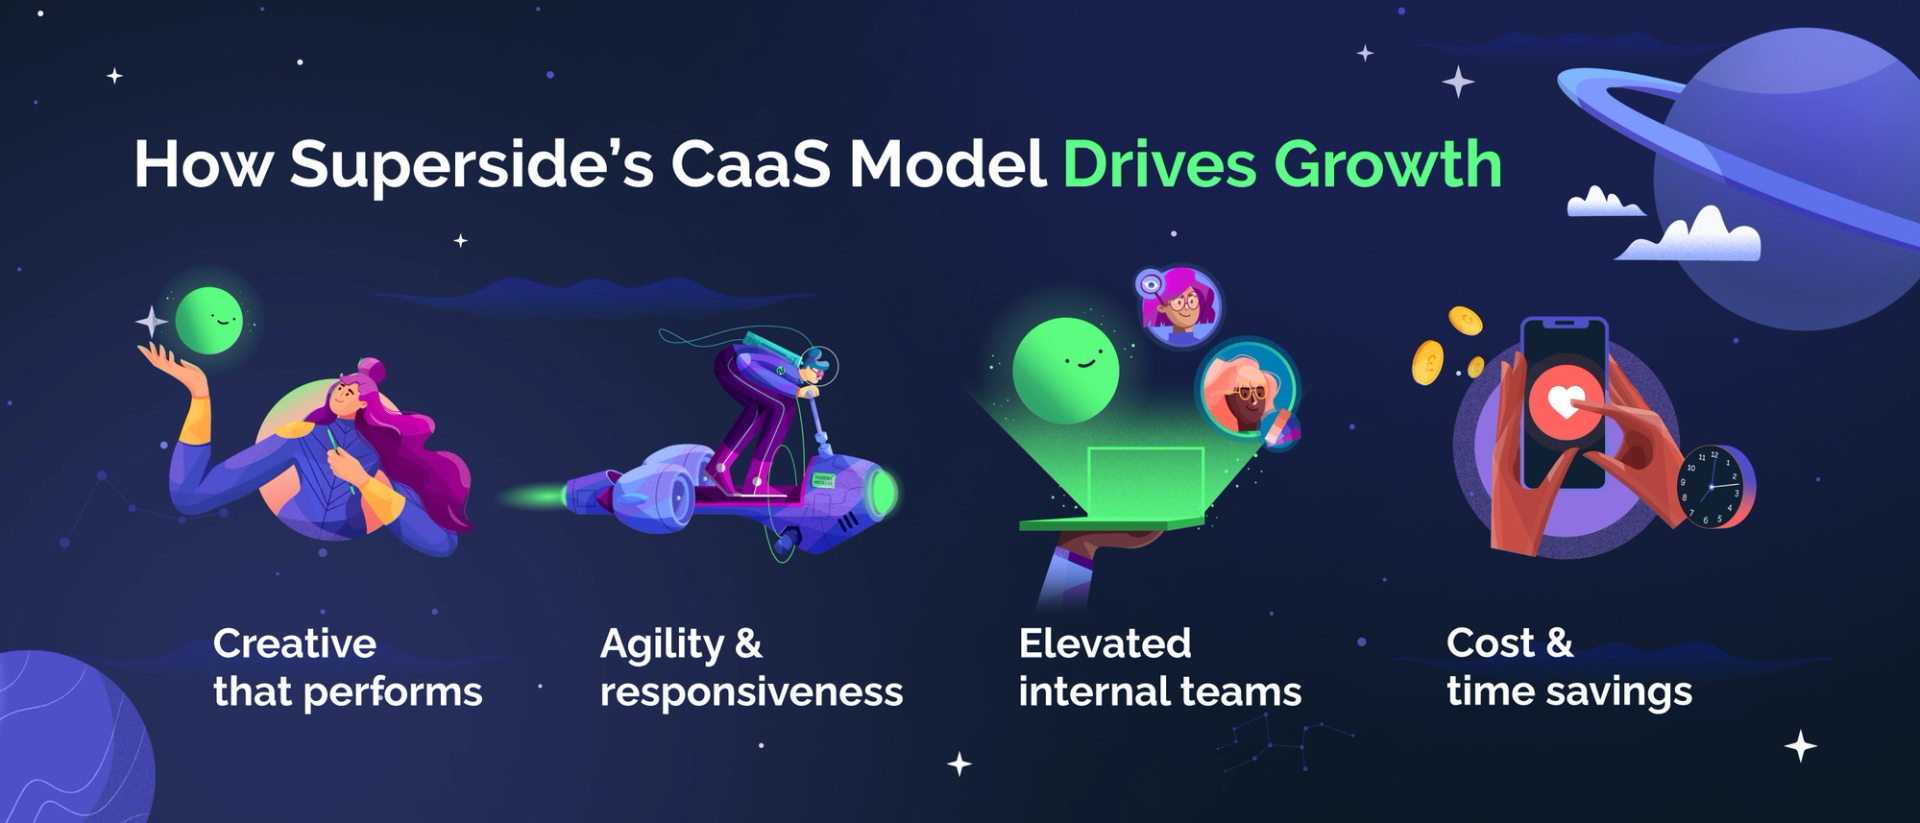 An infographic that explains how Superside's Creative-as-a-Service (CaaS) model drives growth and liberates marketing and creative teams with creative that performs, agility and responsiveness cost- and time-savings. 